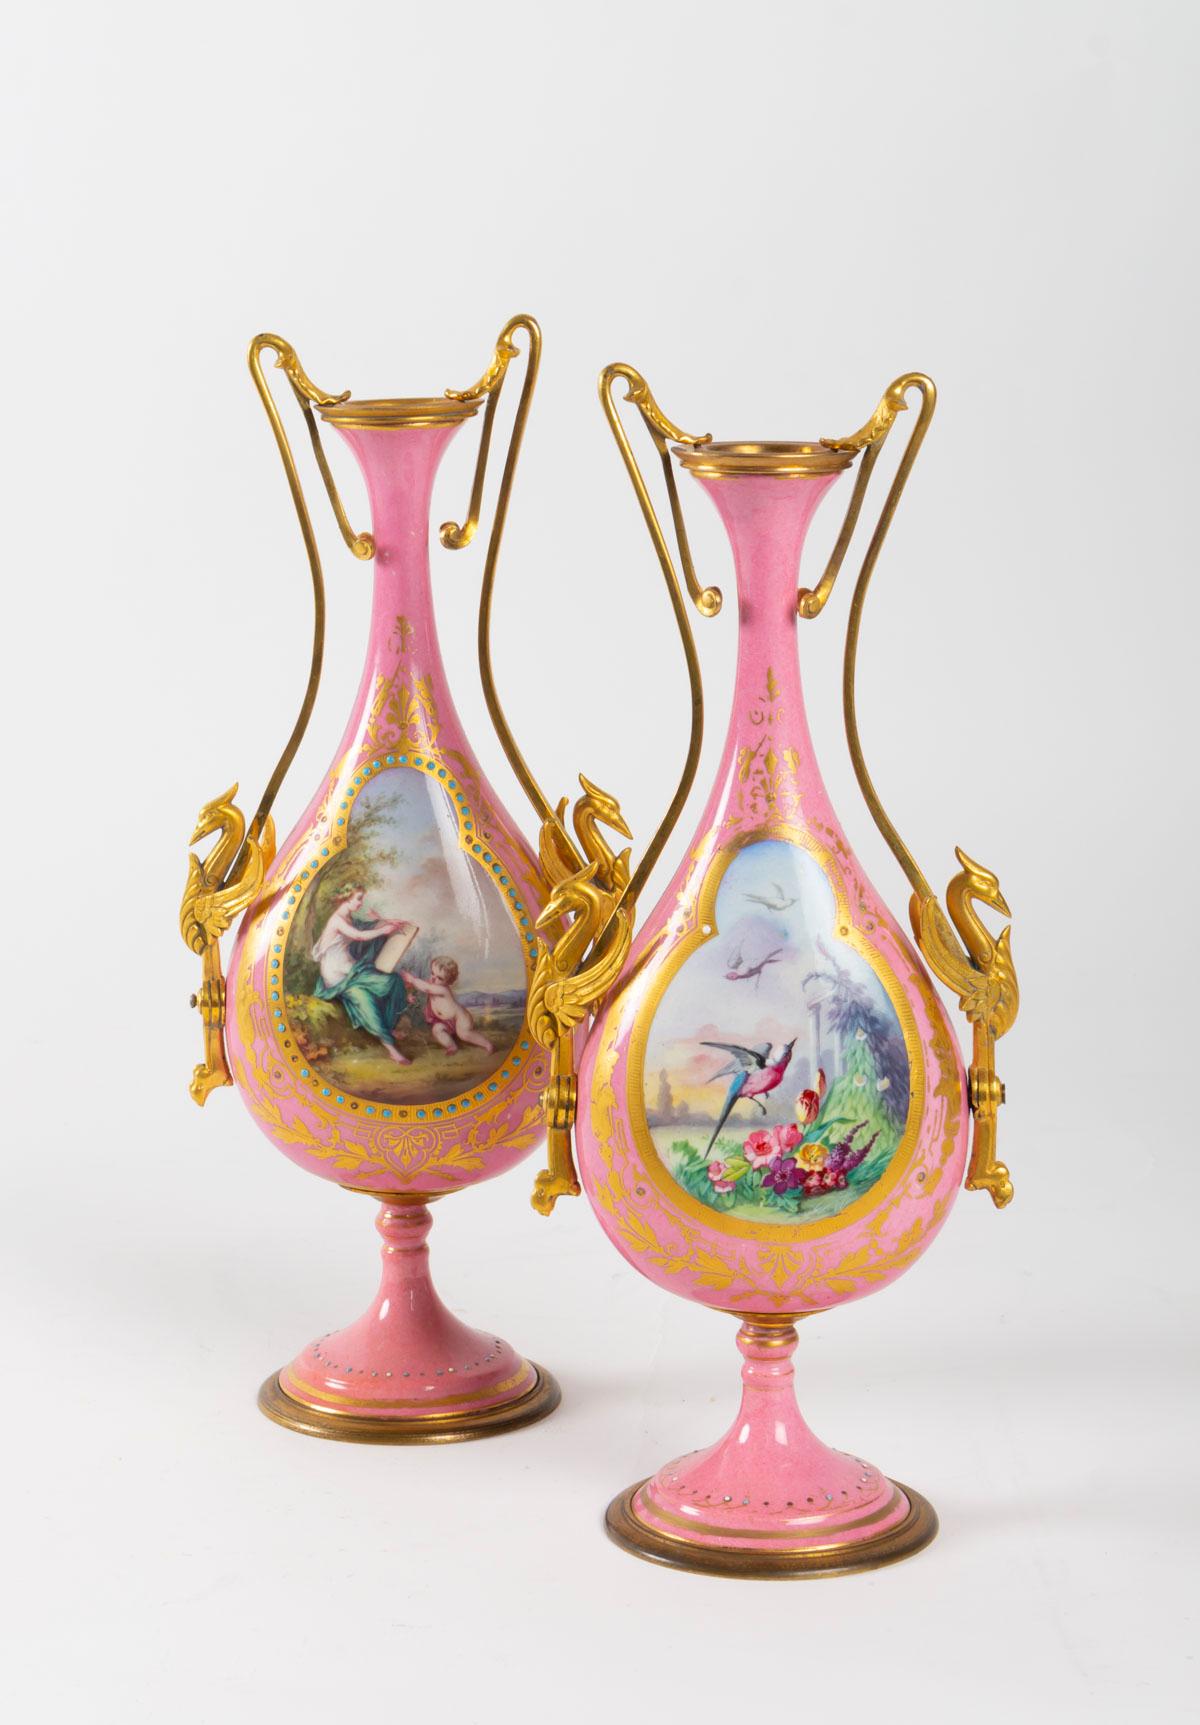 Pair of vases in enameled porcelain and gilded bronze, Napoleon III period, 19th century. Different paintings on the four faces. Very good quality.
Measures: H 30cm, W 14cm, P 9cm.